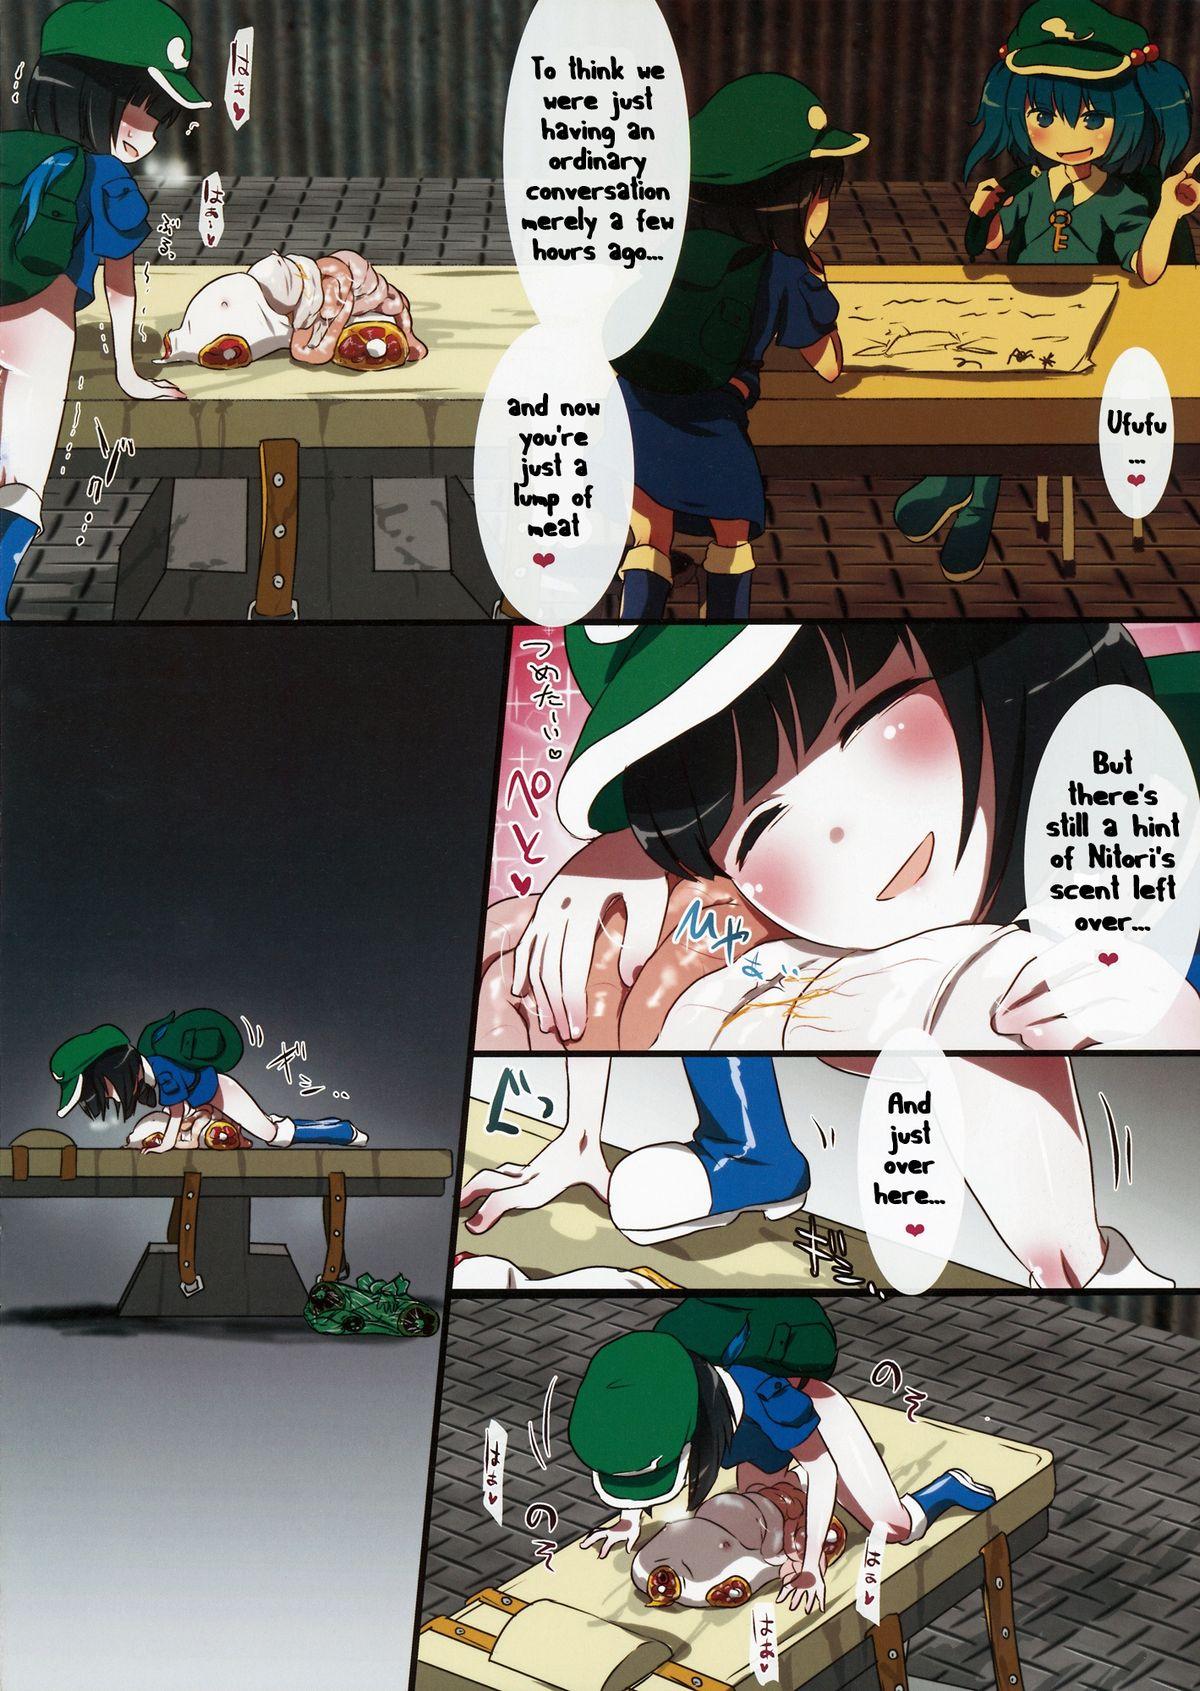 Ballbusting 0210564801 - Touhou project Beurette - Page 10